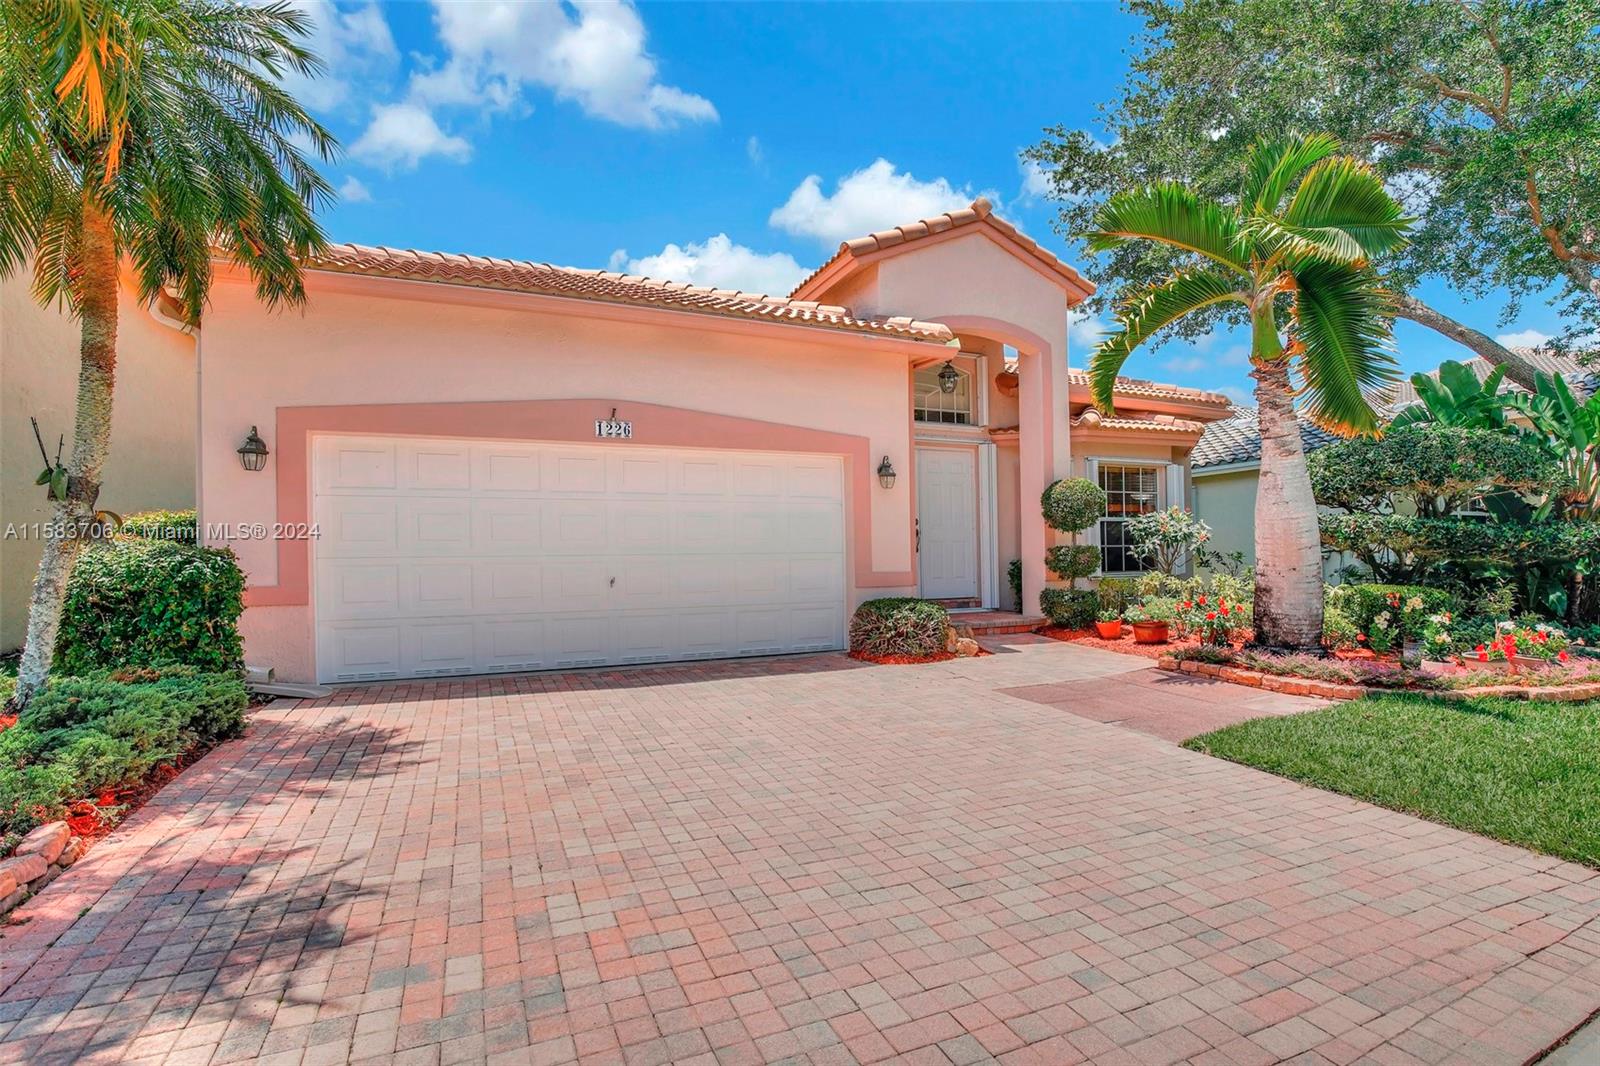 Property for Sale at 1226 Nw 167th Ave, Pembroke Pines, Miami-Dade County, Florida - Bedrooms: 4 
Bathrooms: 2  - $699,000